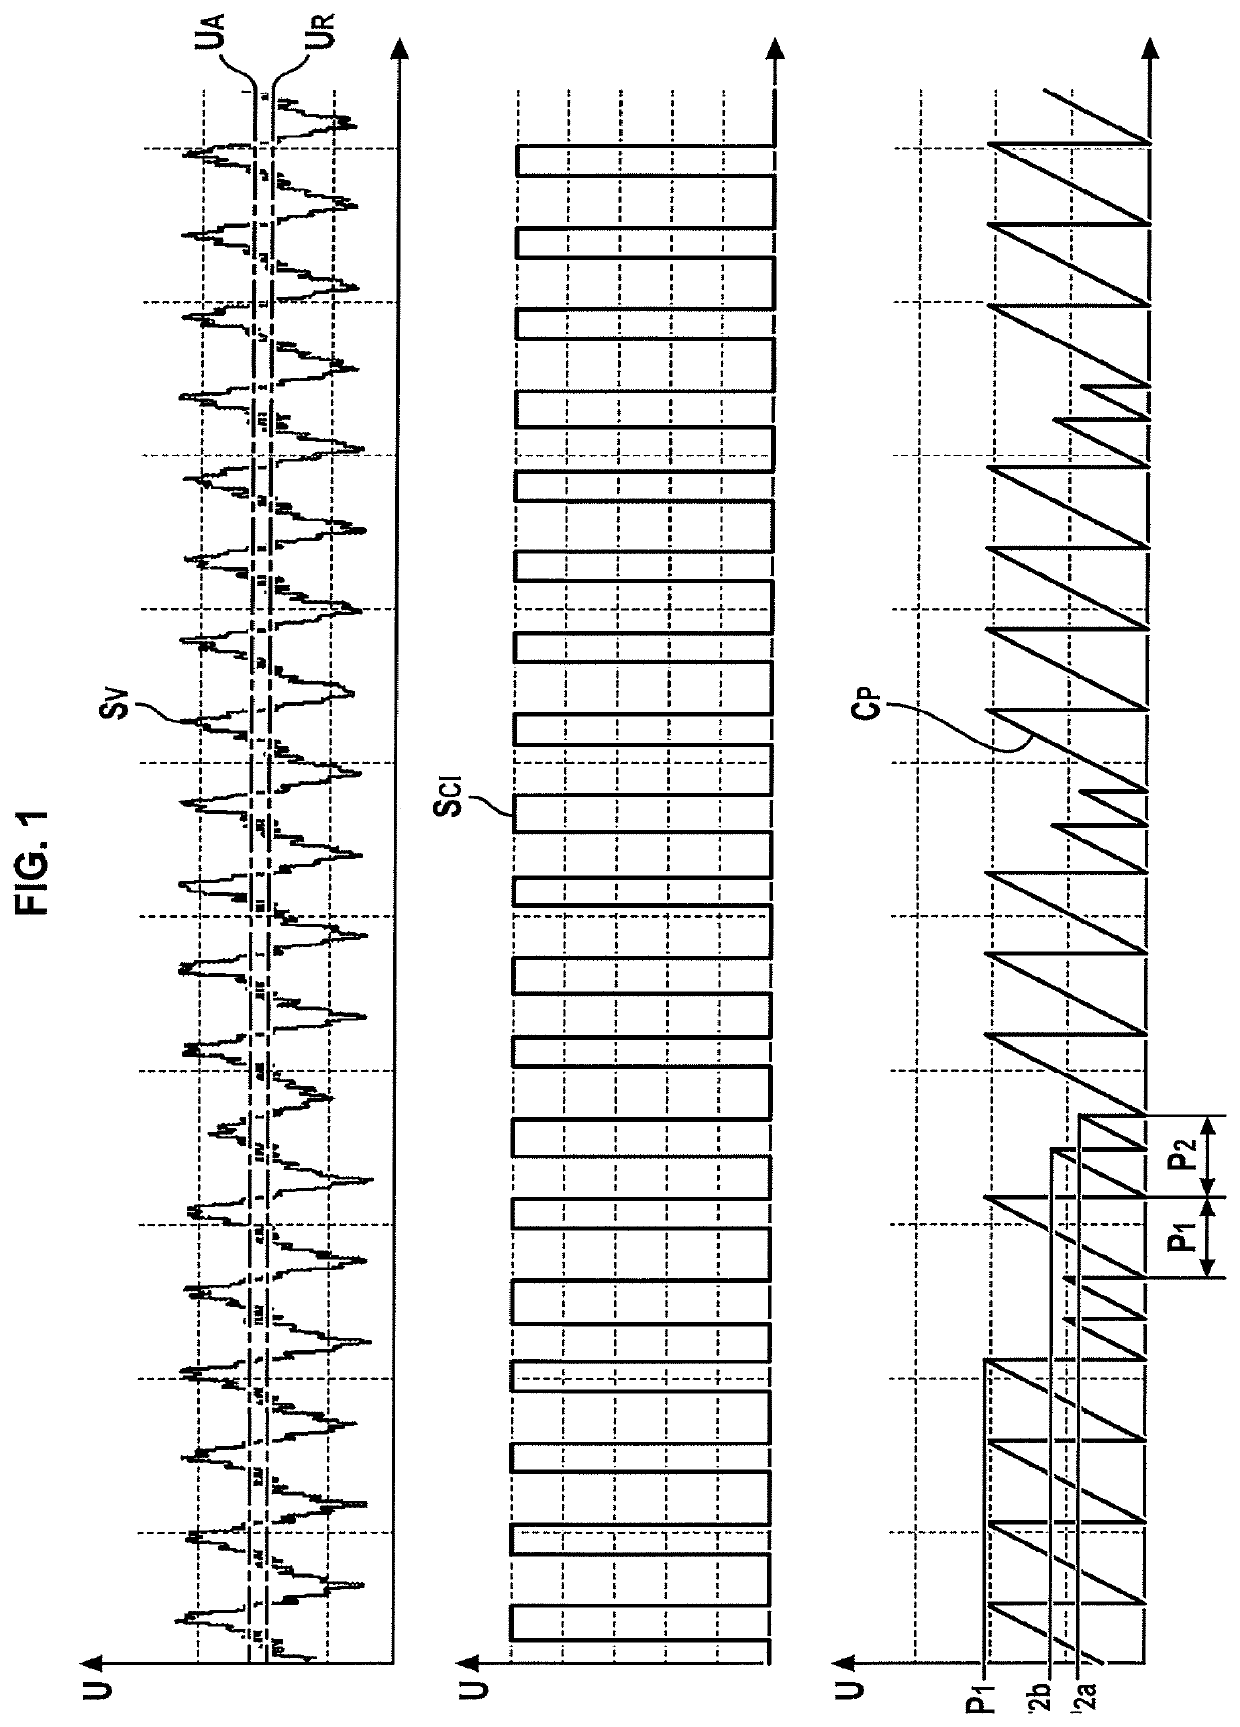 Processing method for a rotation speed signal of an aircraft engine shaft affected by noise